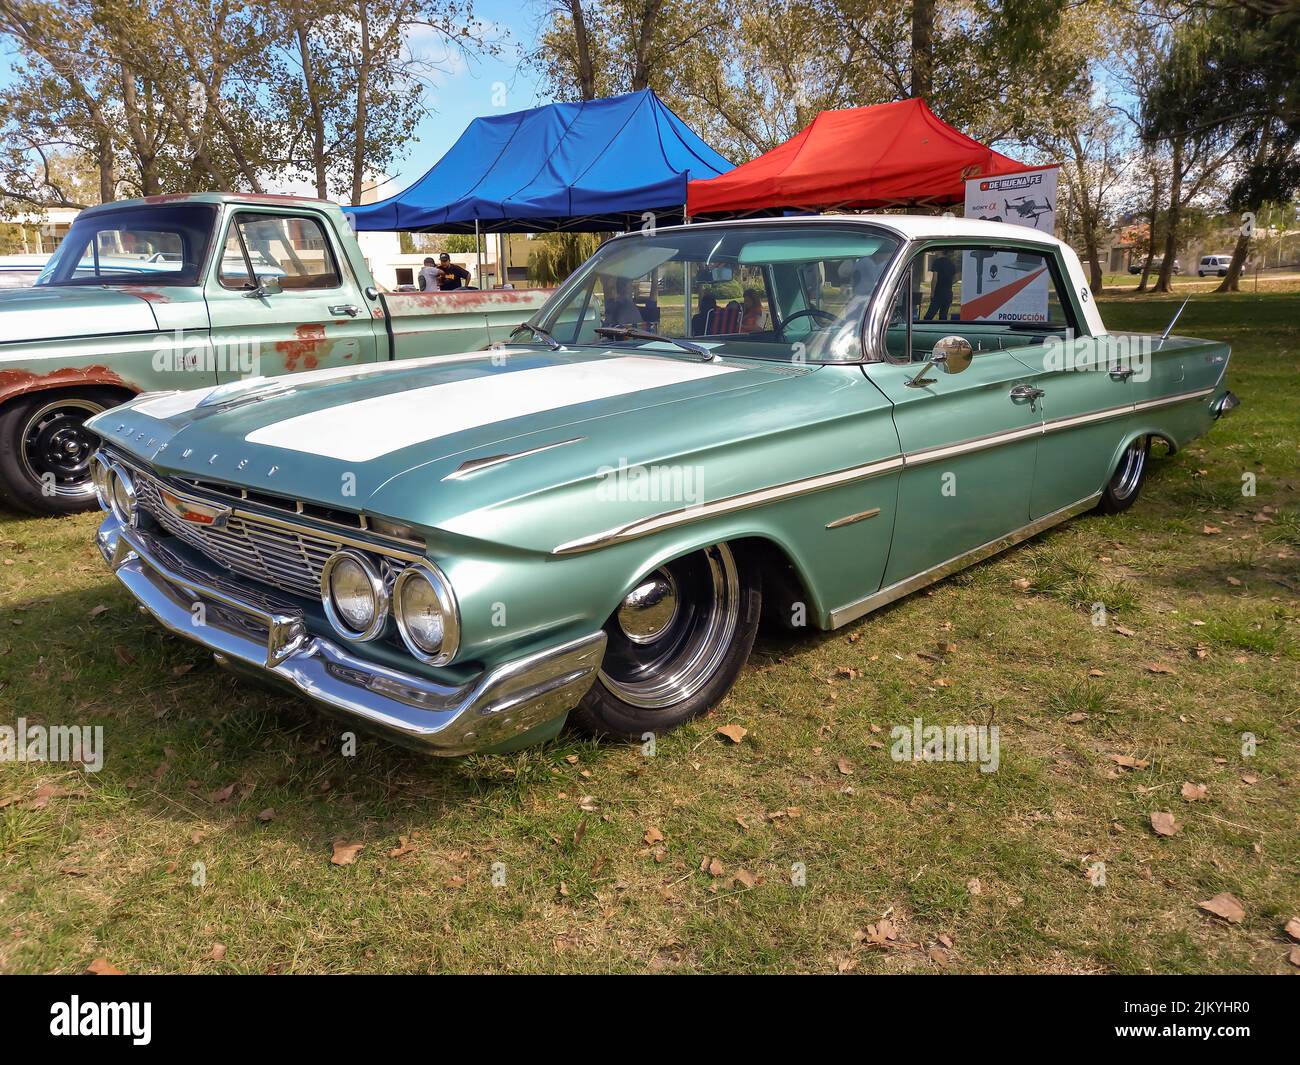 Chascomus, Argentina - Apr 9, 2022 - Old grey Chevrolet Chevy Bel Air sedan four door 1961 classic touring car parked on the grass. Copyspace Stock Photo